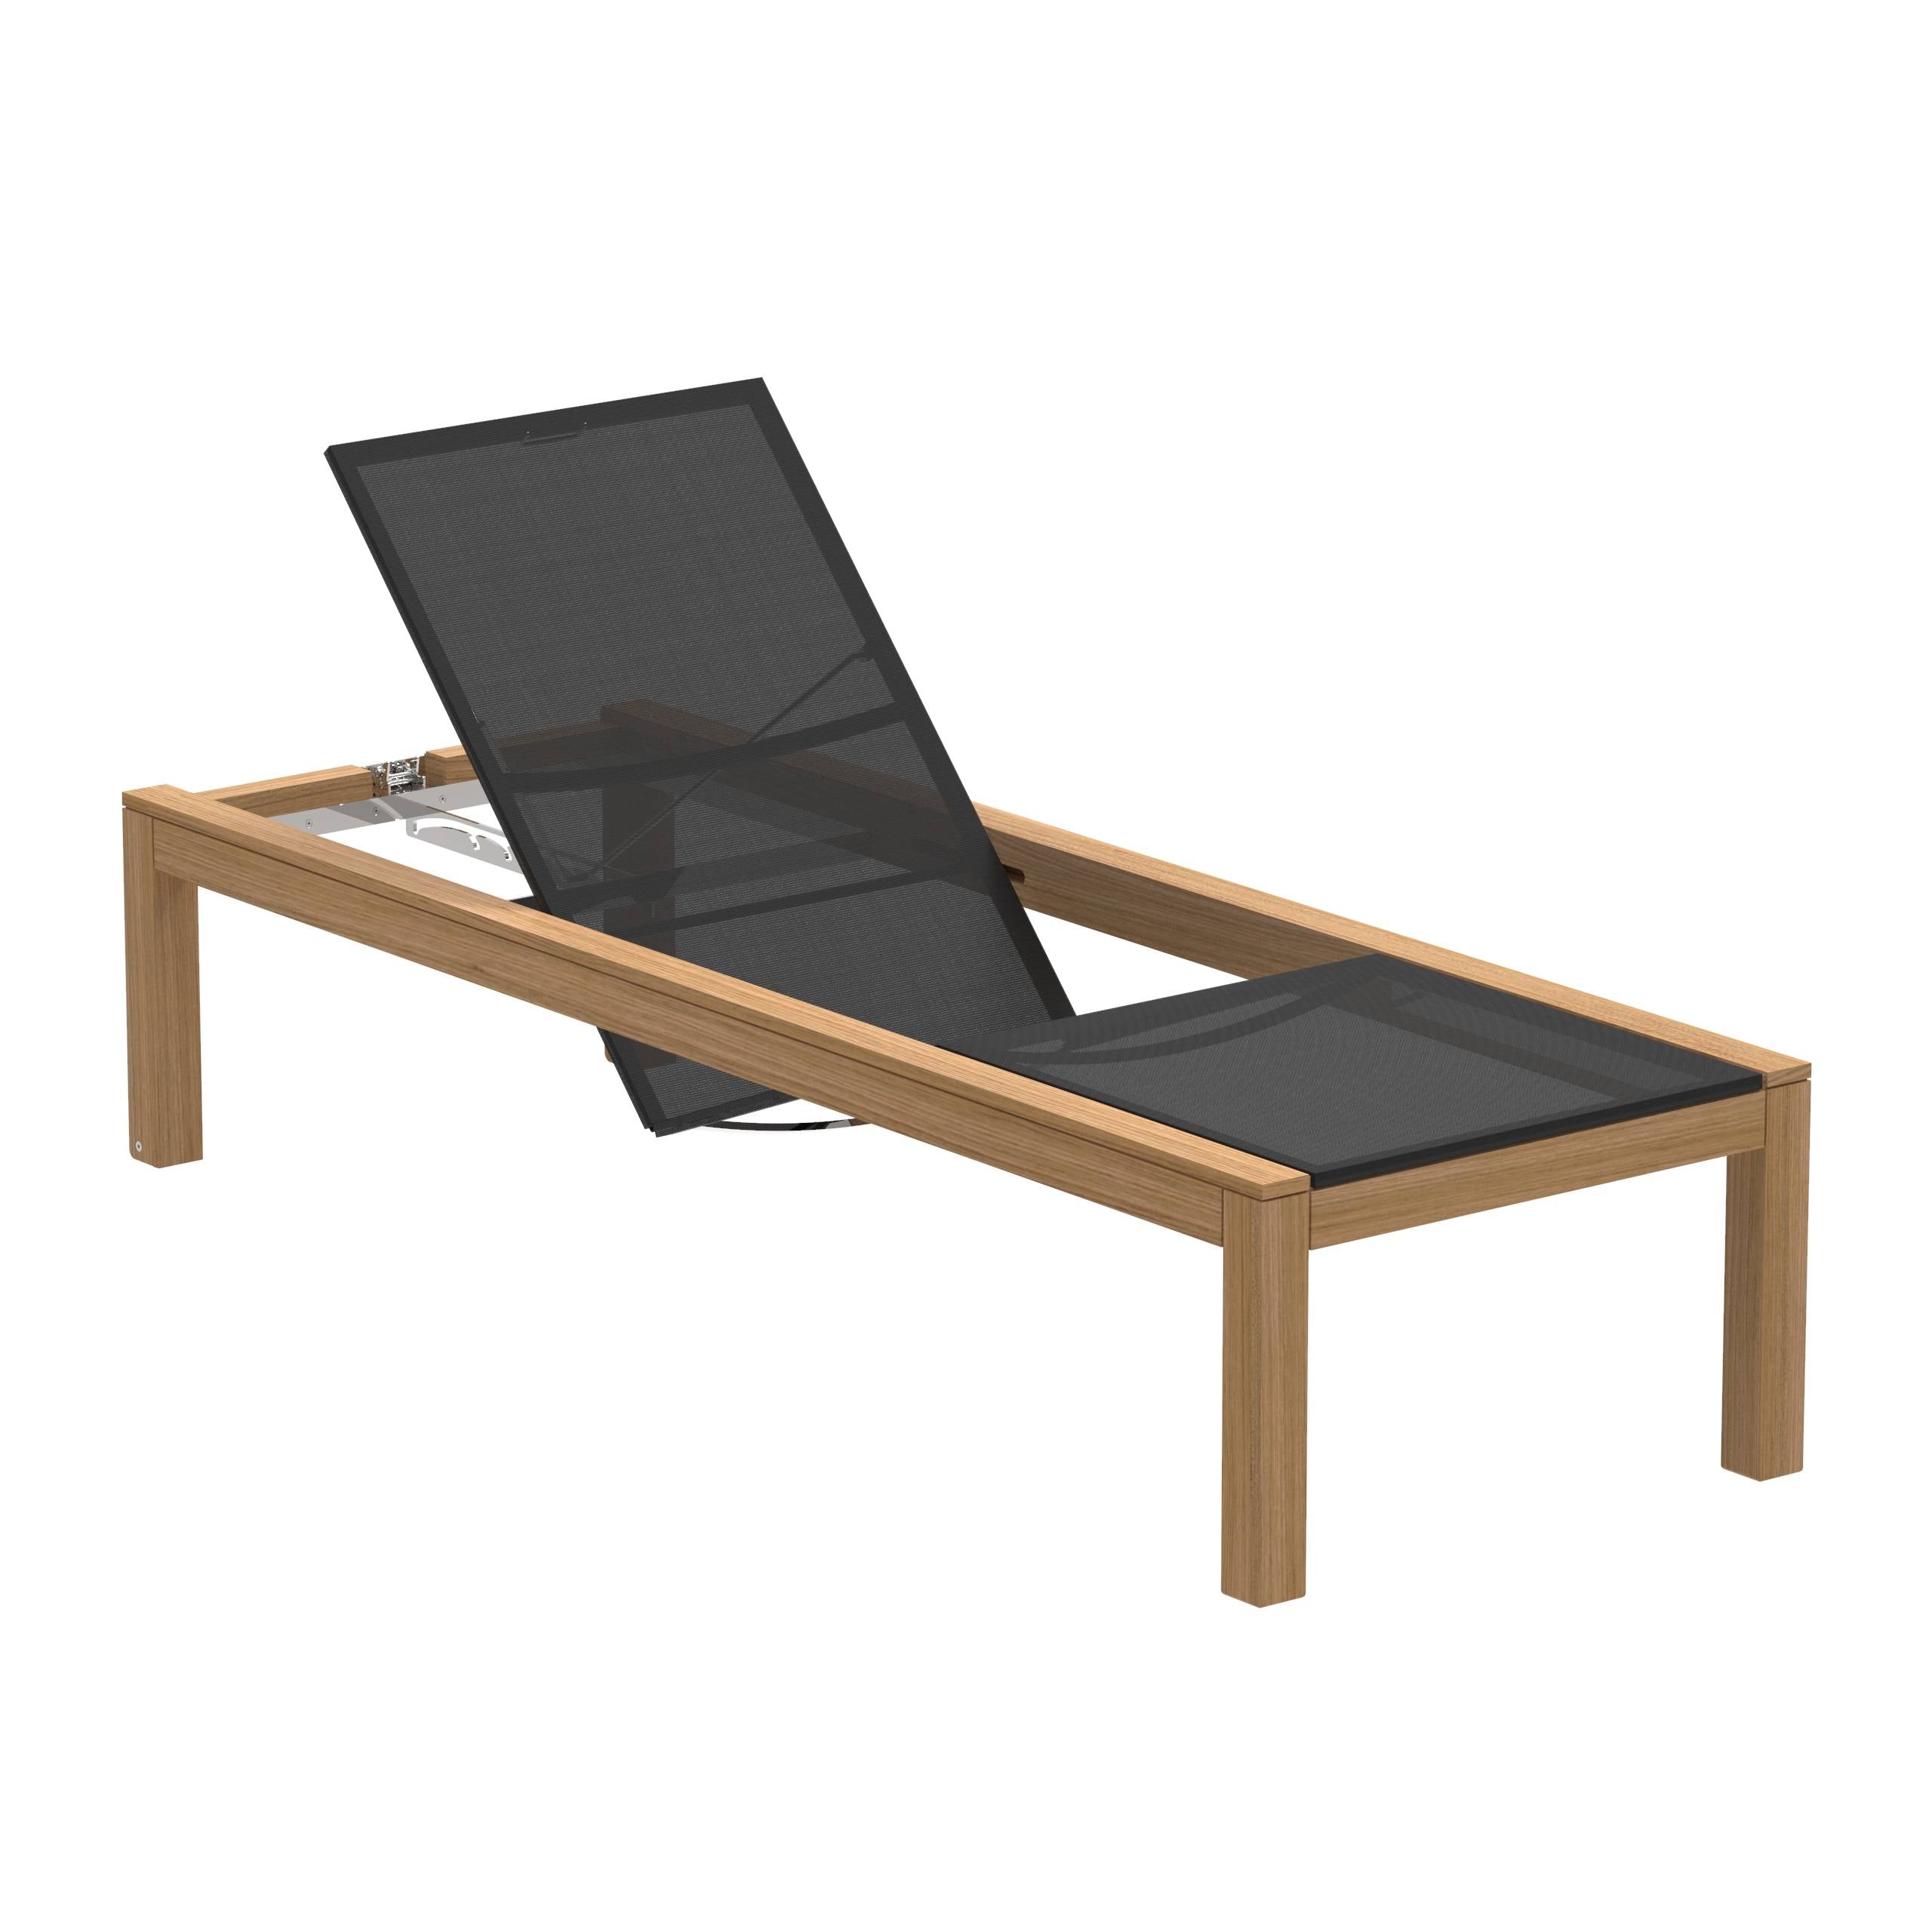 Xqi Reclinable Lounger In Teak With Batyline Black